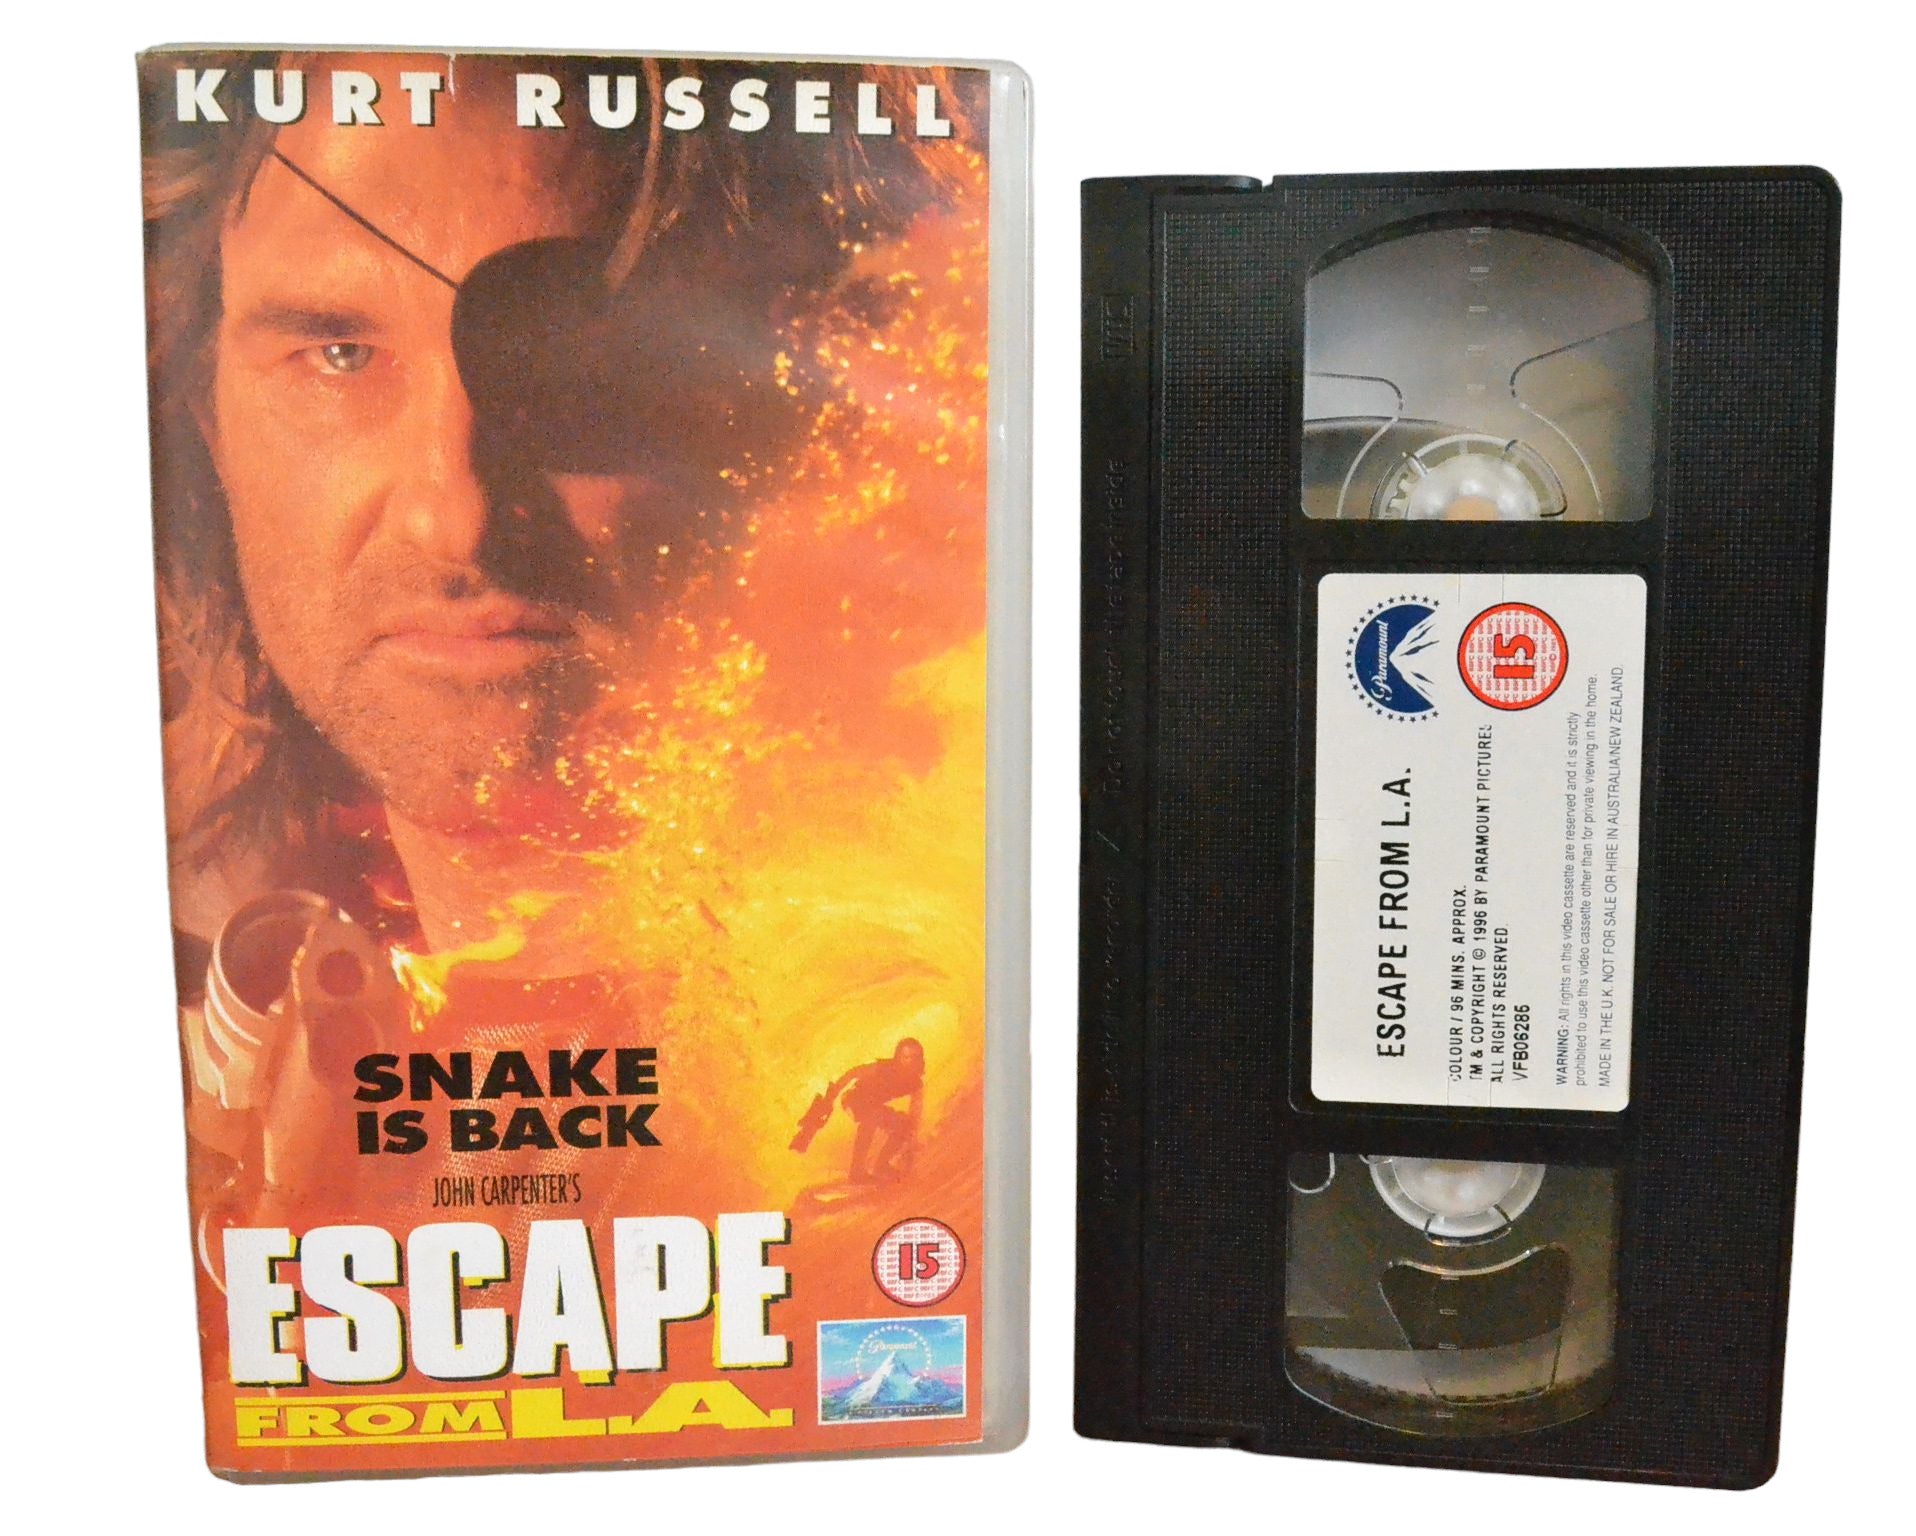 Escape From L.A. - Kurt Russell - Paramount Pictures - VHR4424 - Action - Pal - VHS-